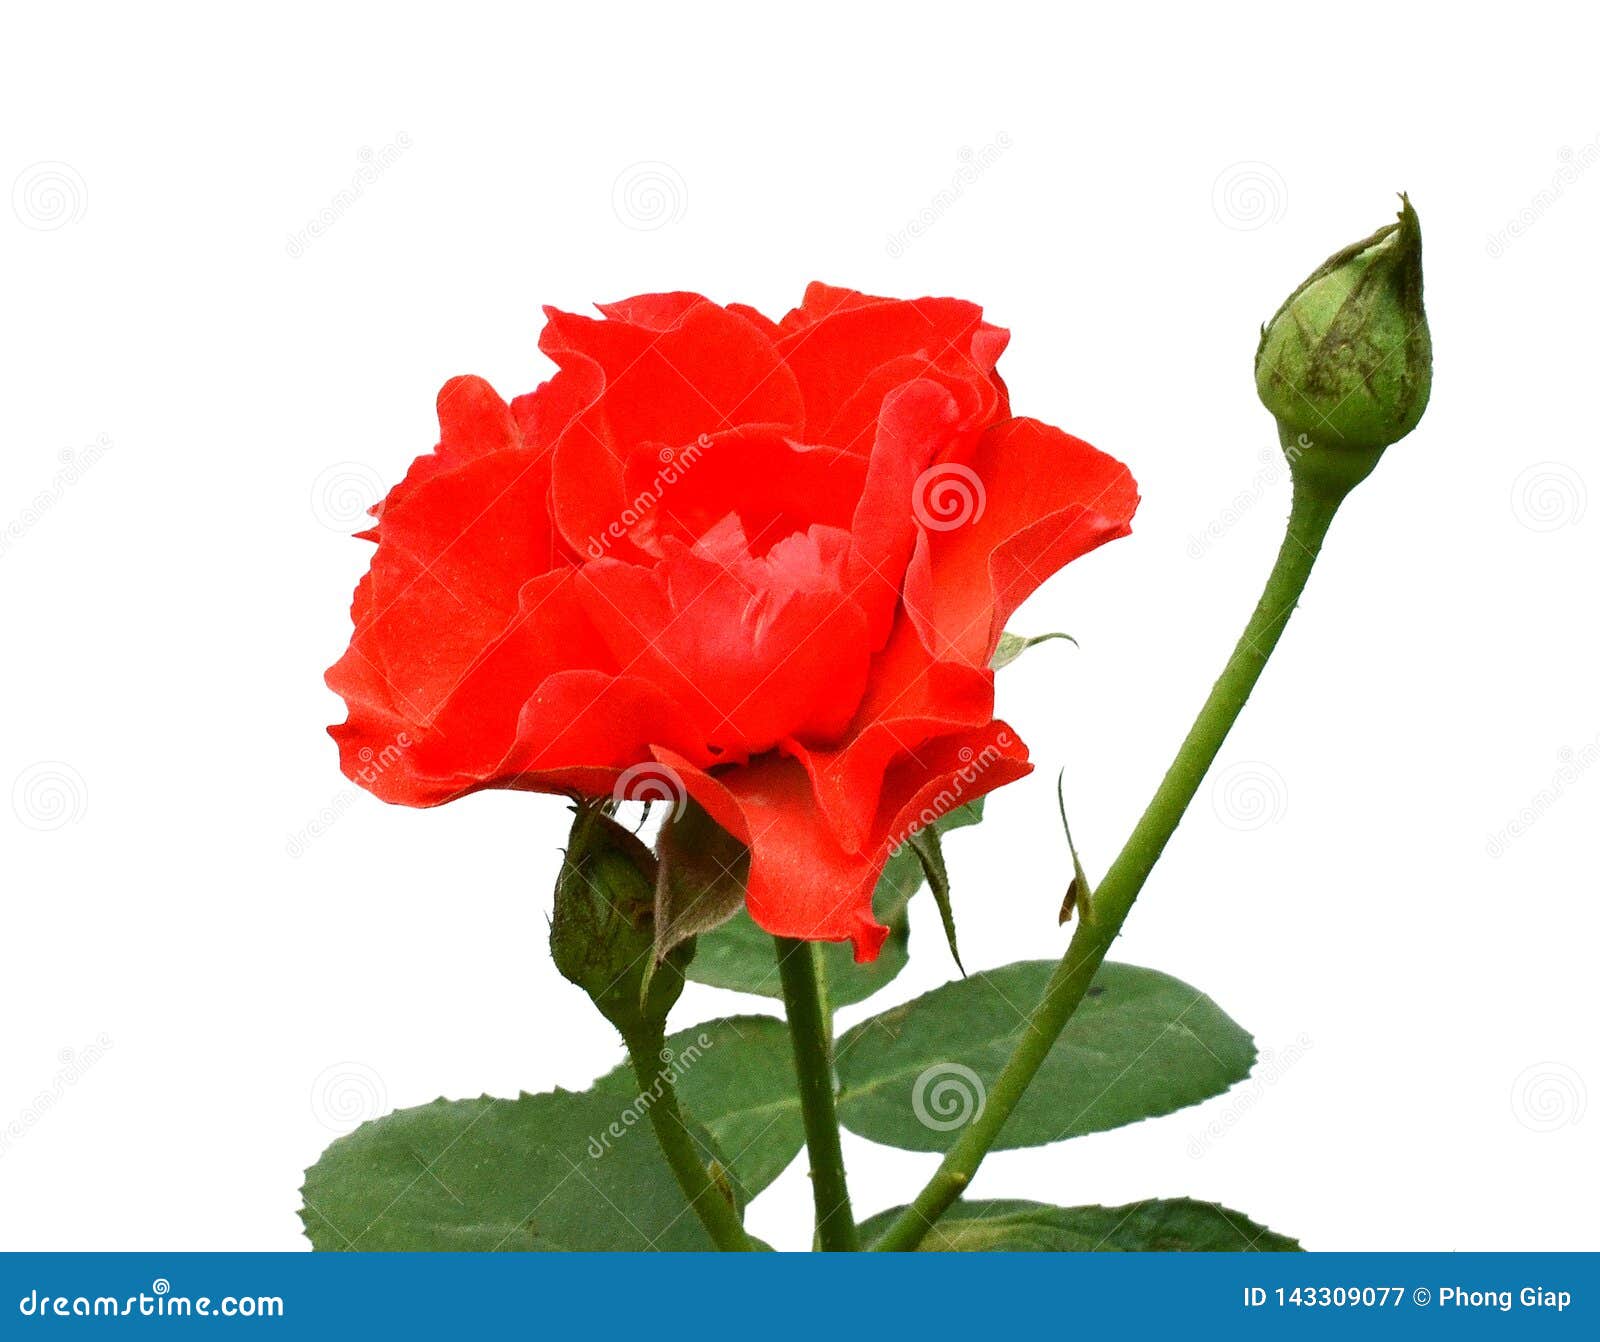 red roses over white background.